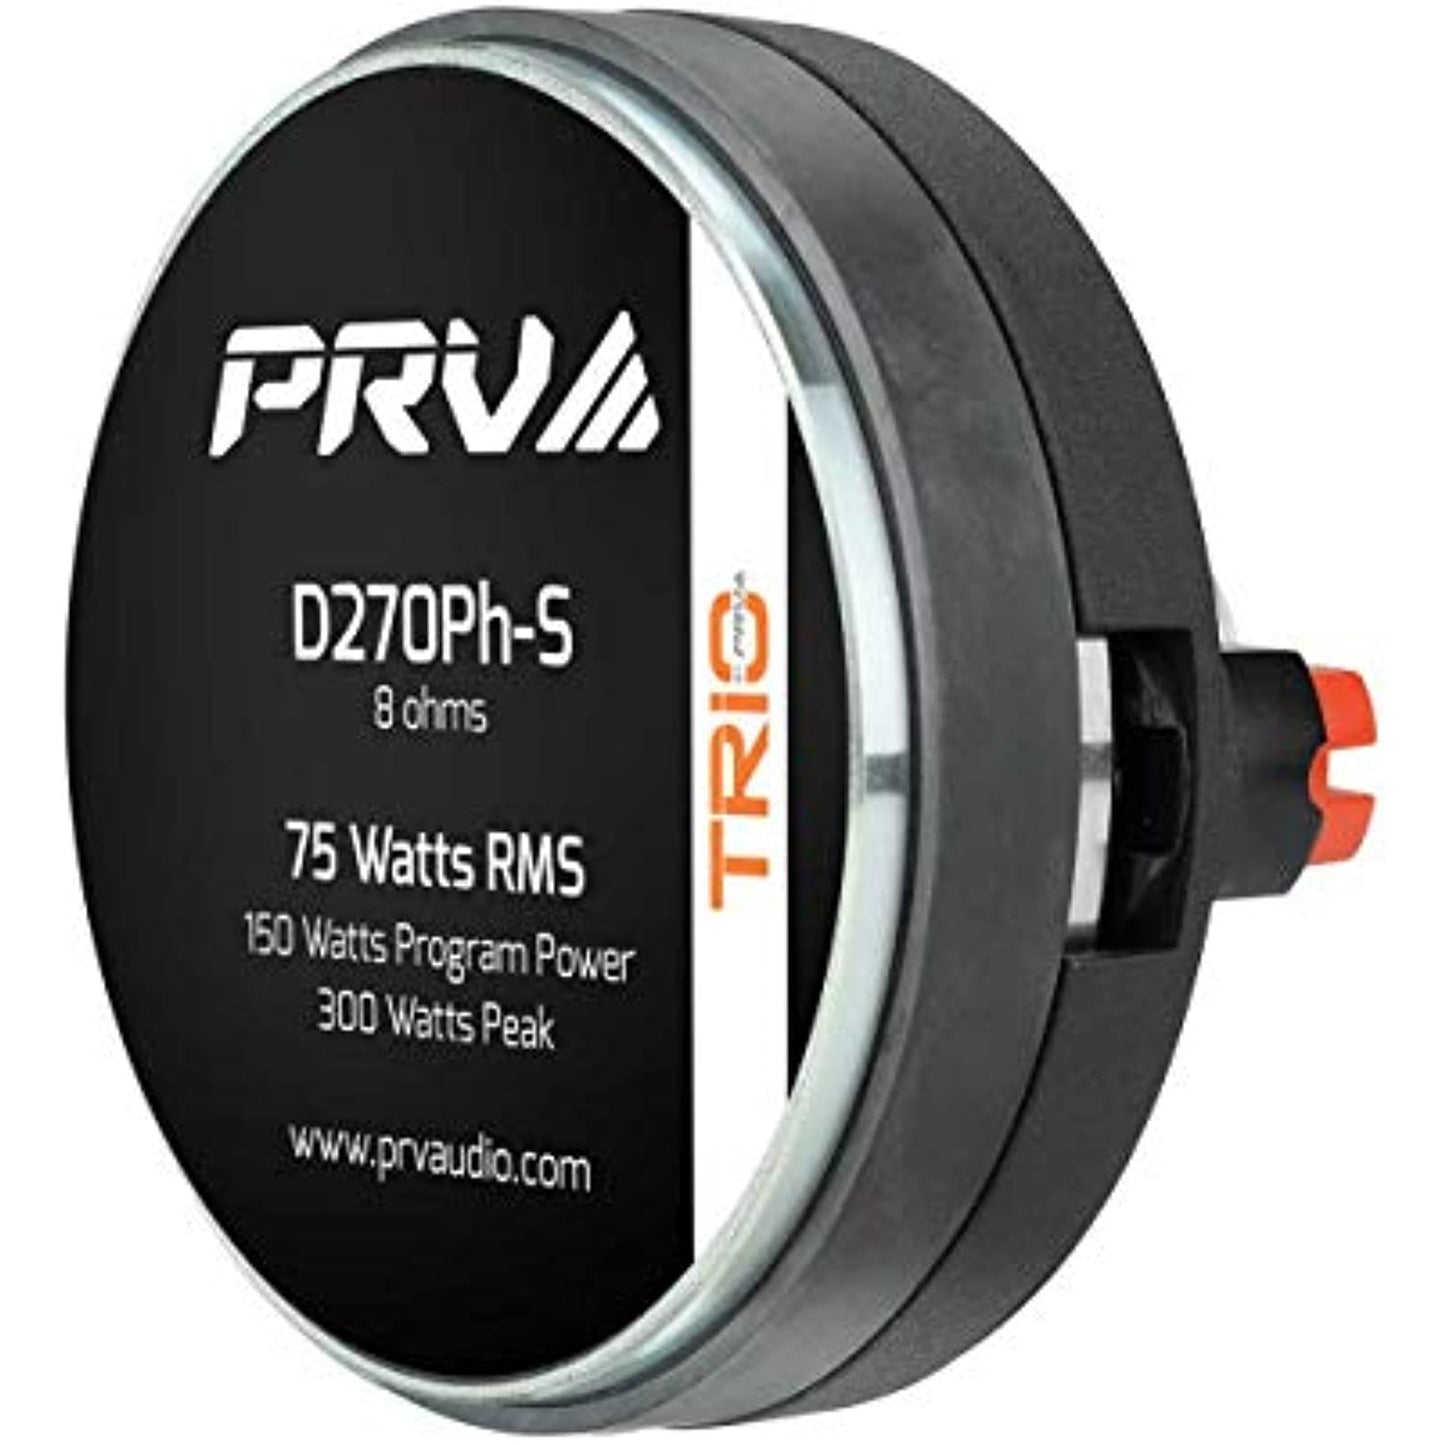 PRV AUDIO D270Ph Compression Driver 1" Exit Phenolic Driver for Vocal Reproduction, 2" Voice Coil 150 Watts 8 Ohms Improved Performance on New Compact Design (Single)